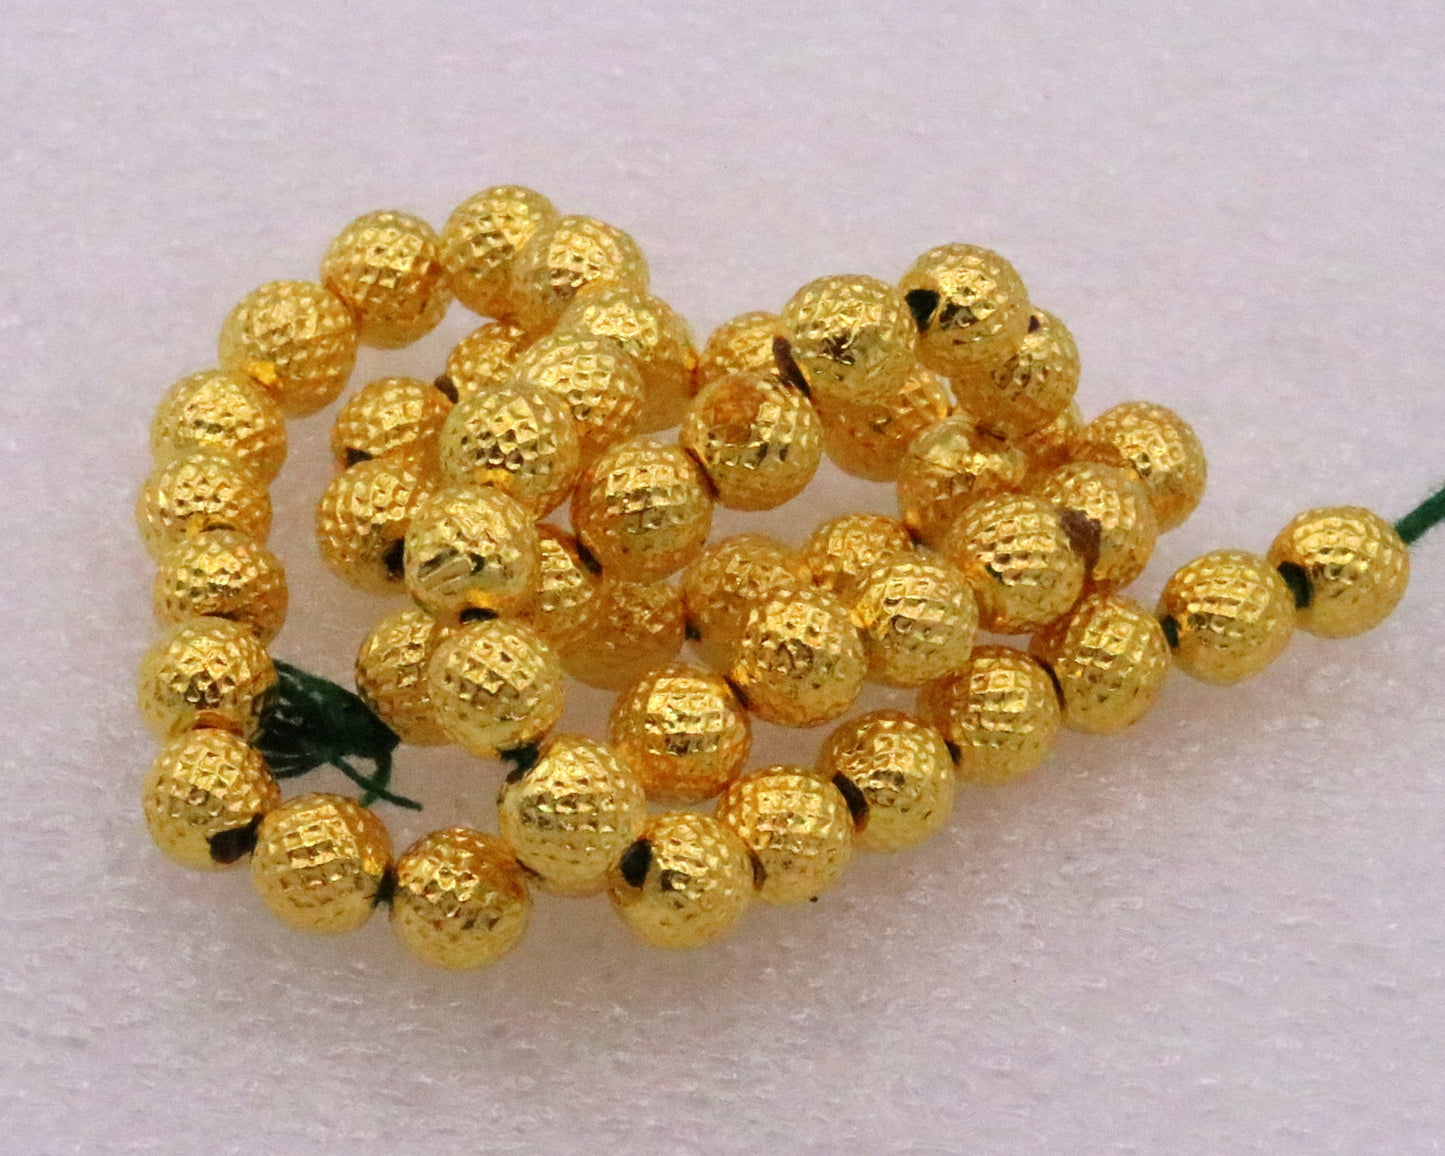 Lot 25 pieces Vintage handmade 22kt yellow gold beads ball for excellent jewelry making idea tribal rajasthani beads - TRIBAL ORNAMENTS